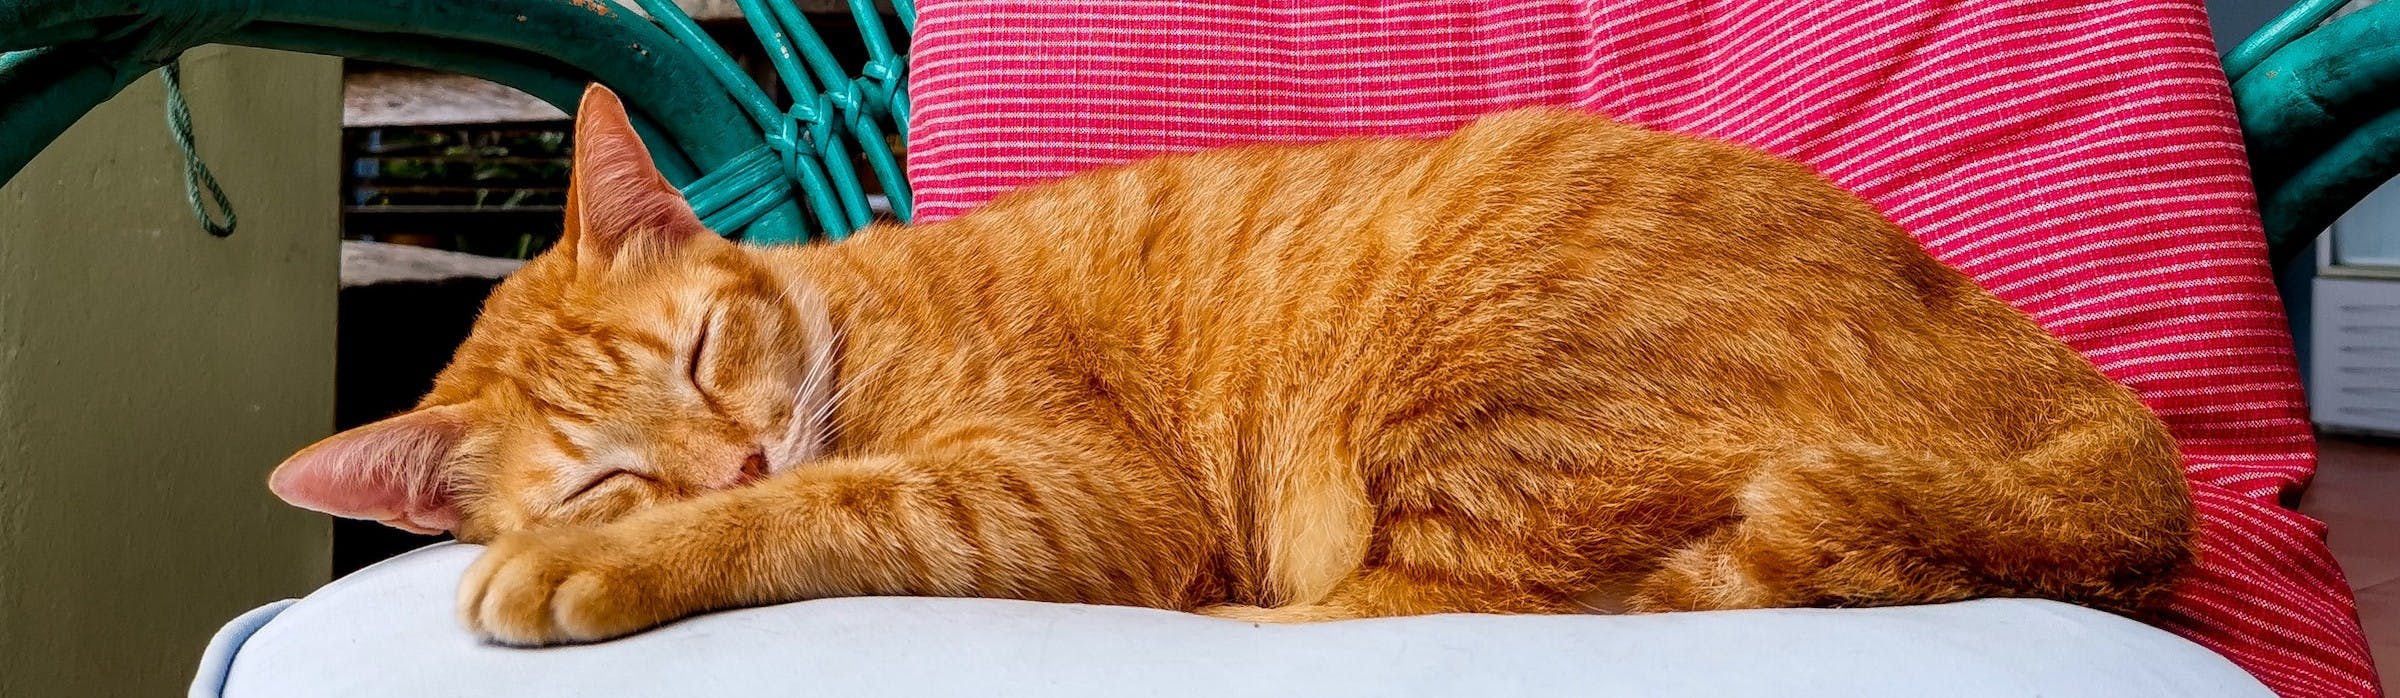 What Do Cats Like? 10 Cat-Tastic Pleasures That Will Melt Their Hearts!